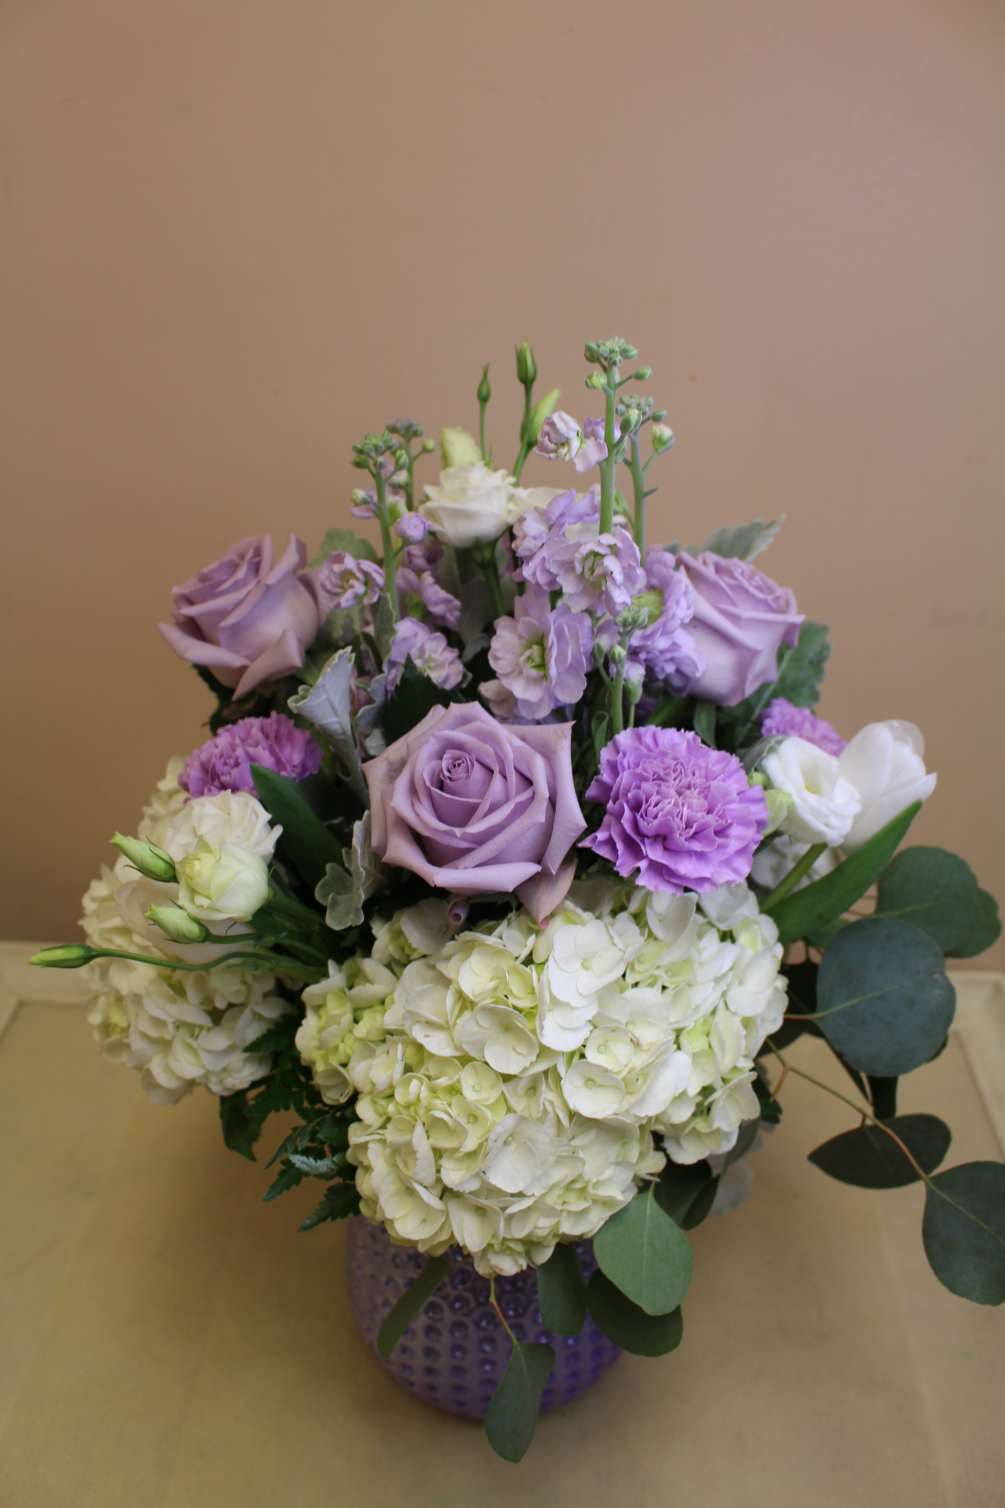 A lavender iridescent vase filled with hydrangea, purple roses and other flowers